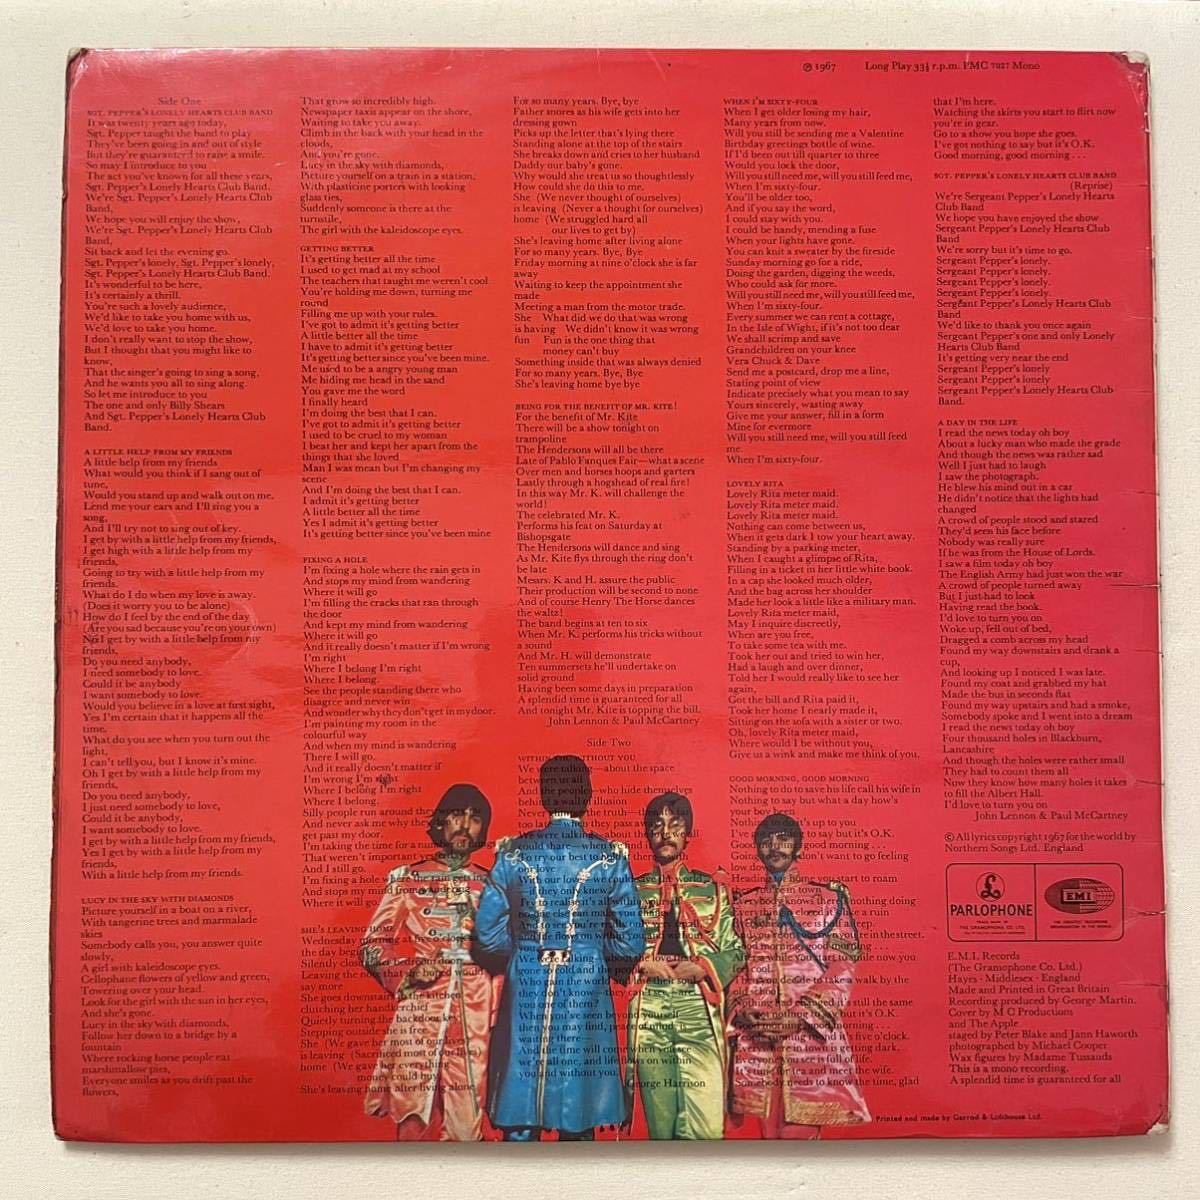 1stプレス完品 特集記事付 UKorg MONO LP THE BEATLES SGT. PEPPERS LONELY HEARTS CLUB BAND UKオリジナル盤 PMC7027 ビートルズ レコード_画像2